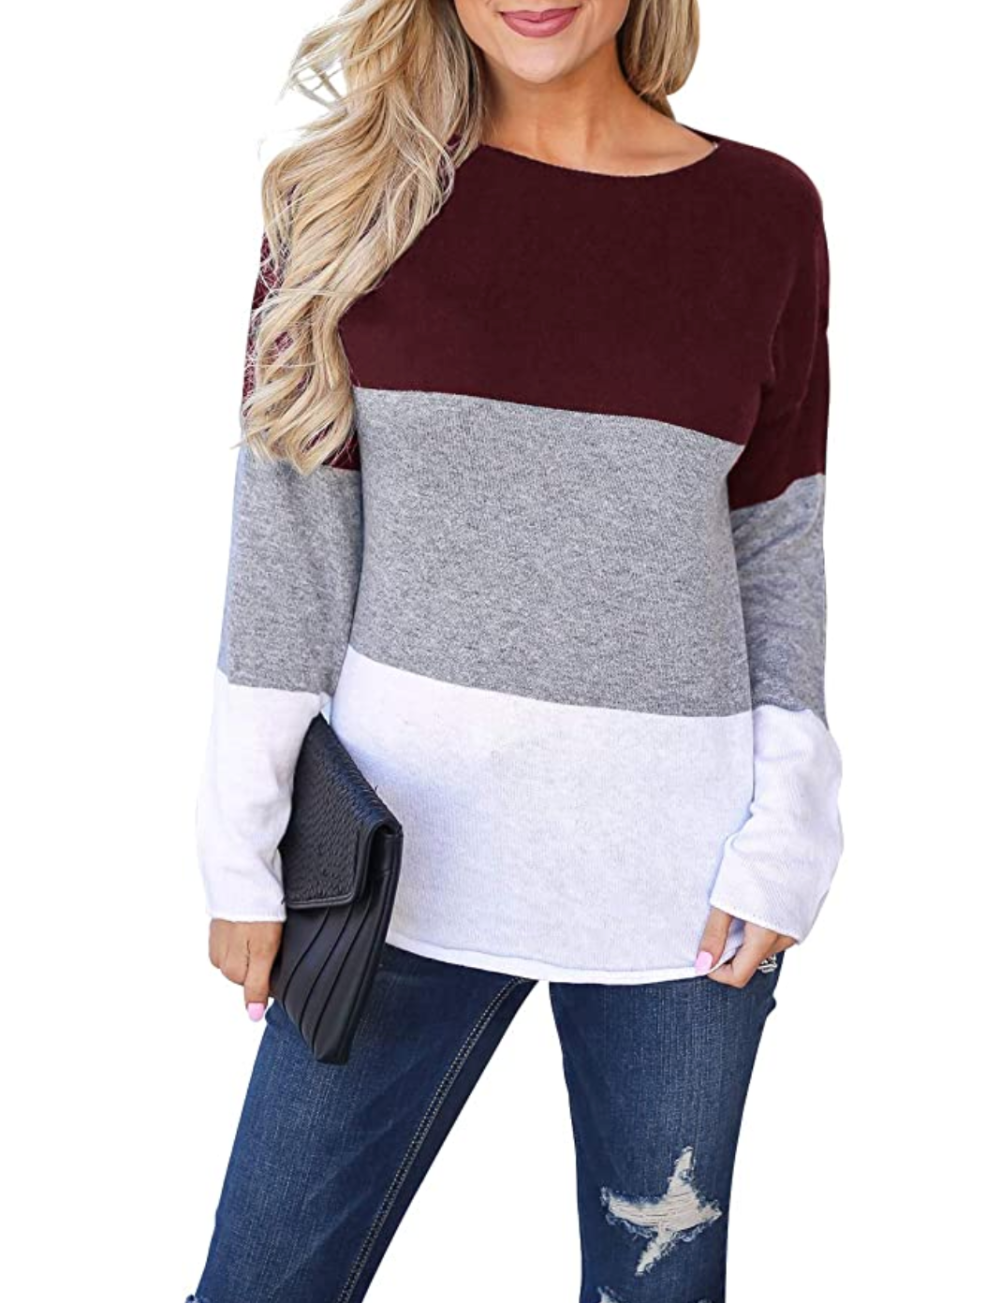 Blooming Jelly Color-Blocked Top Can Be Styled in So Many Ways | Us Weekly